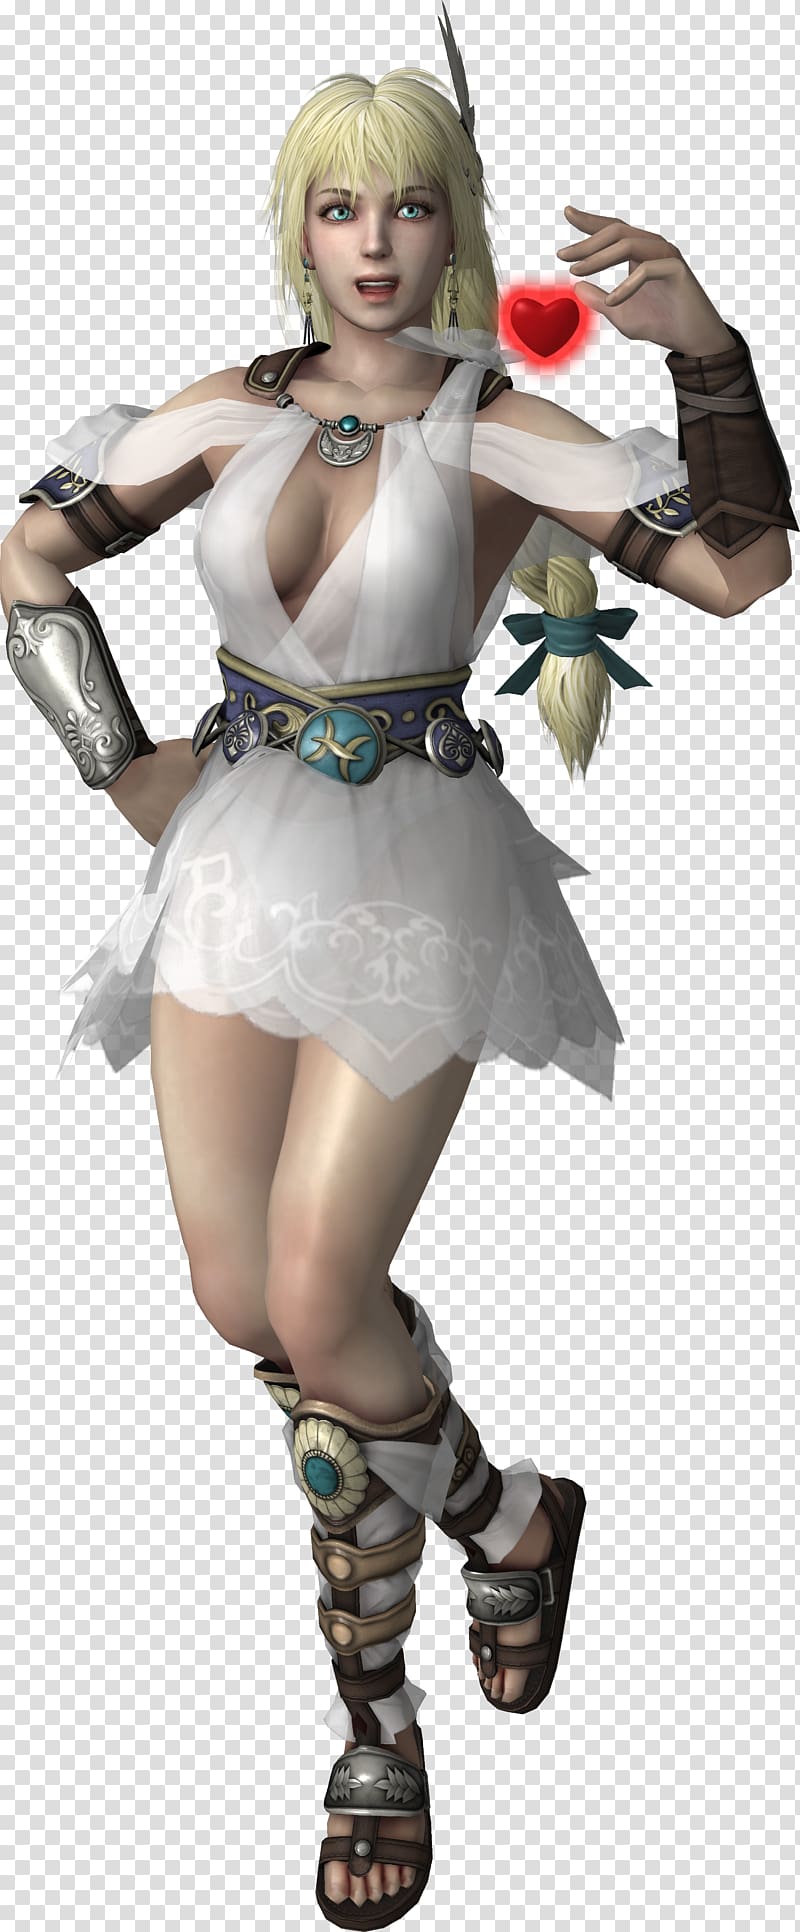 Soulcalibur III Soulcalibur V Sophitia Namco Video game, others transparent background PNG clipart